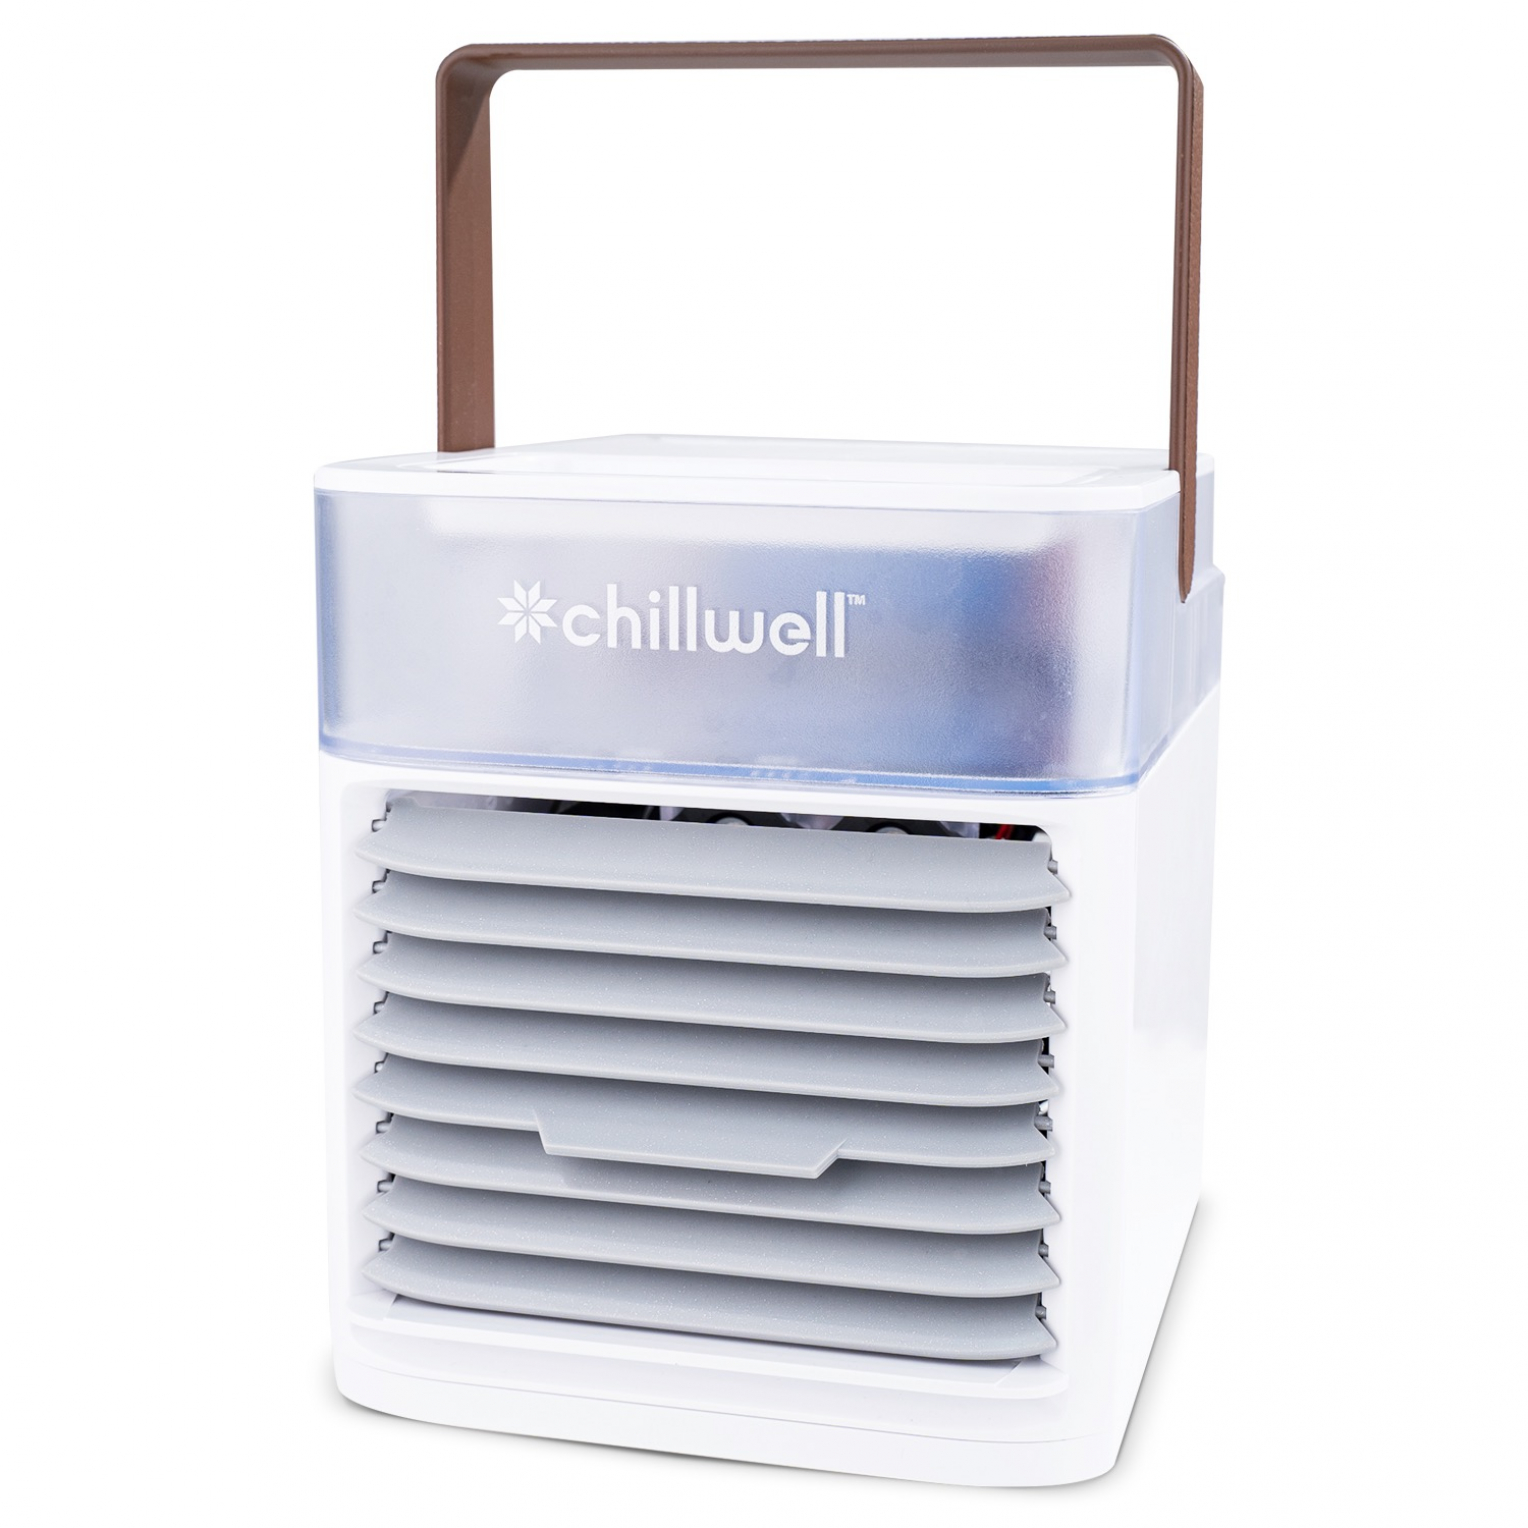 Chillwell Ac Conditioner For Room